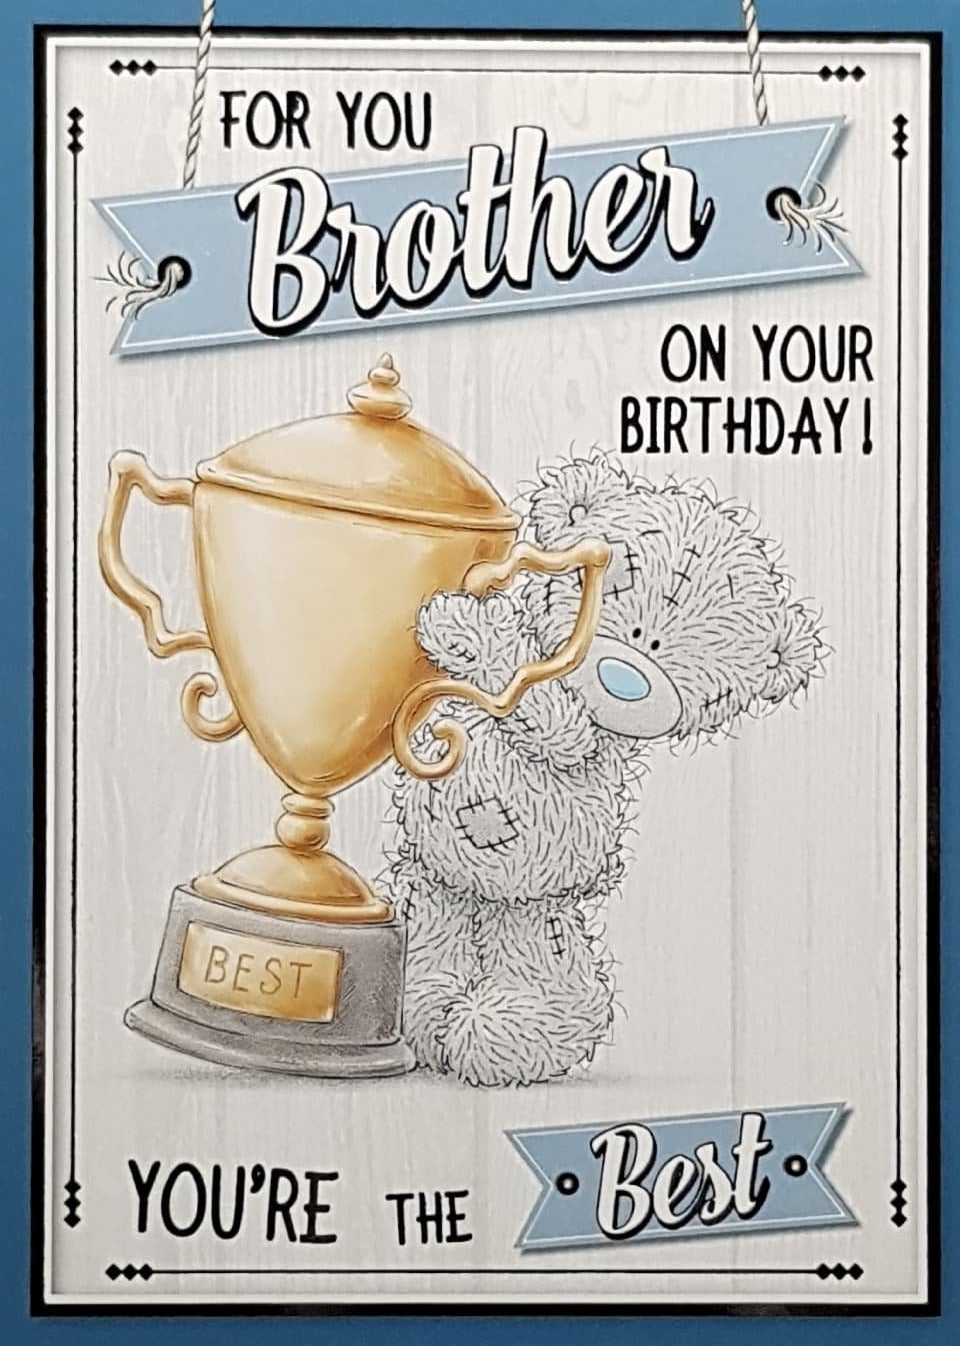 Birthday Card - Brother / You're The Best ! & A Gold Trophy